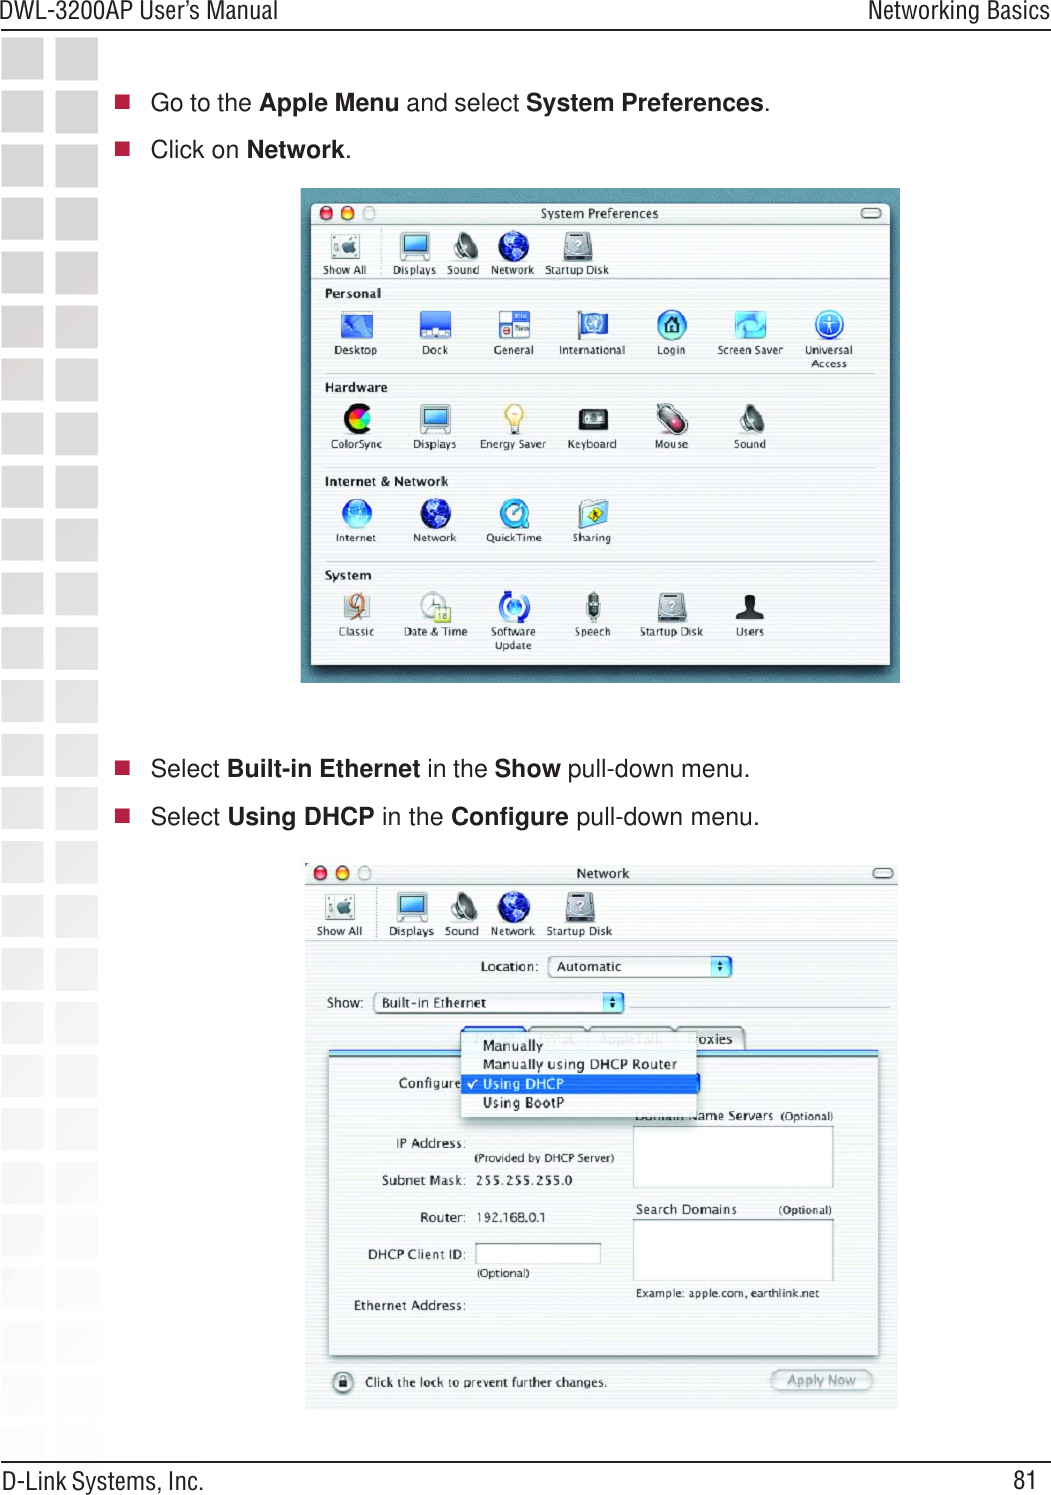 81DWL-3200AP User’s ManualD-Link Systems, Inc.Networking BasicsGo to the Apple Menu and select System Preferences.Click on Network.Select Built-in Ethernet in the Show pull-down menu.Select Using DHCP in the Configure pull-down menu.